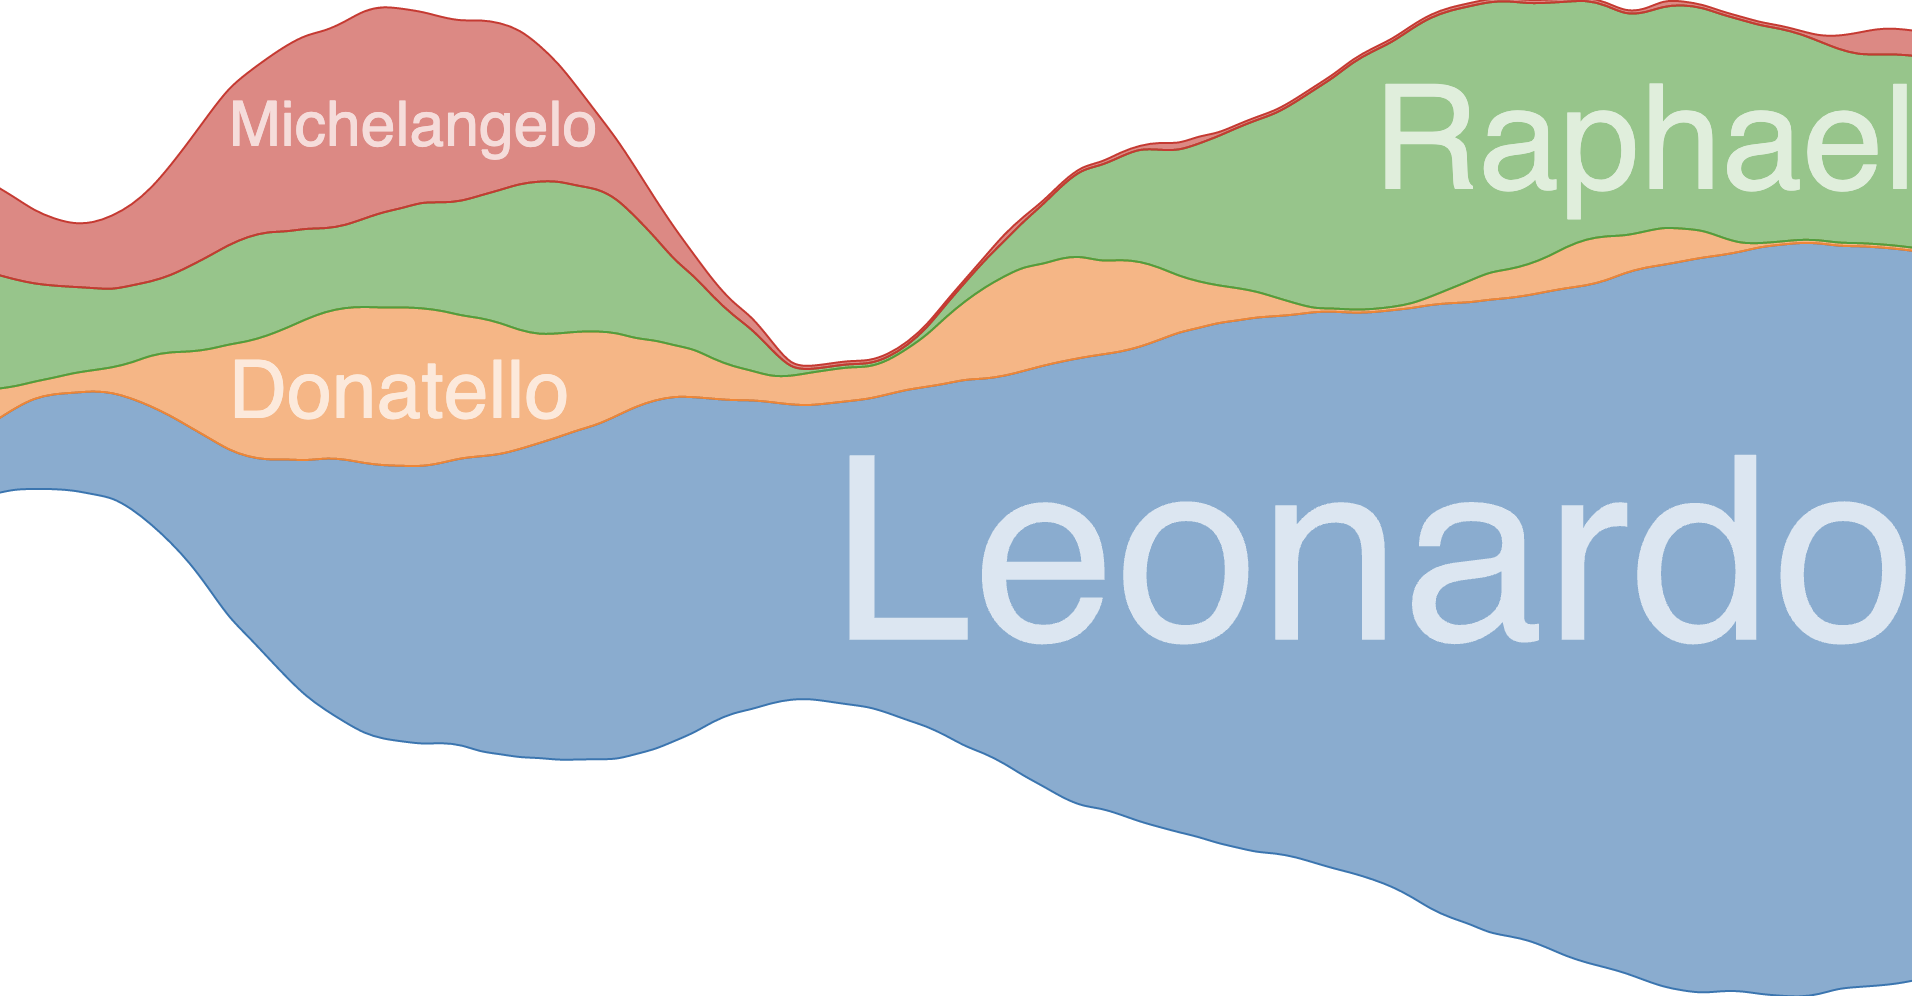 A streamgraph showing streams for the names Michelangelo, Donatello, Raphael and Leonardo. The font size of the names is proportional to the size of the streams